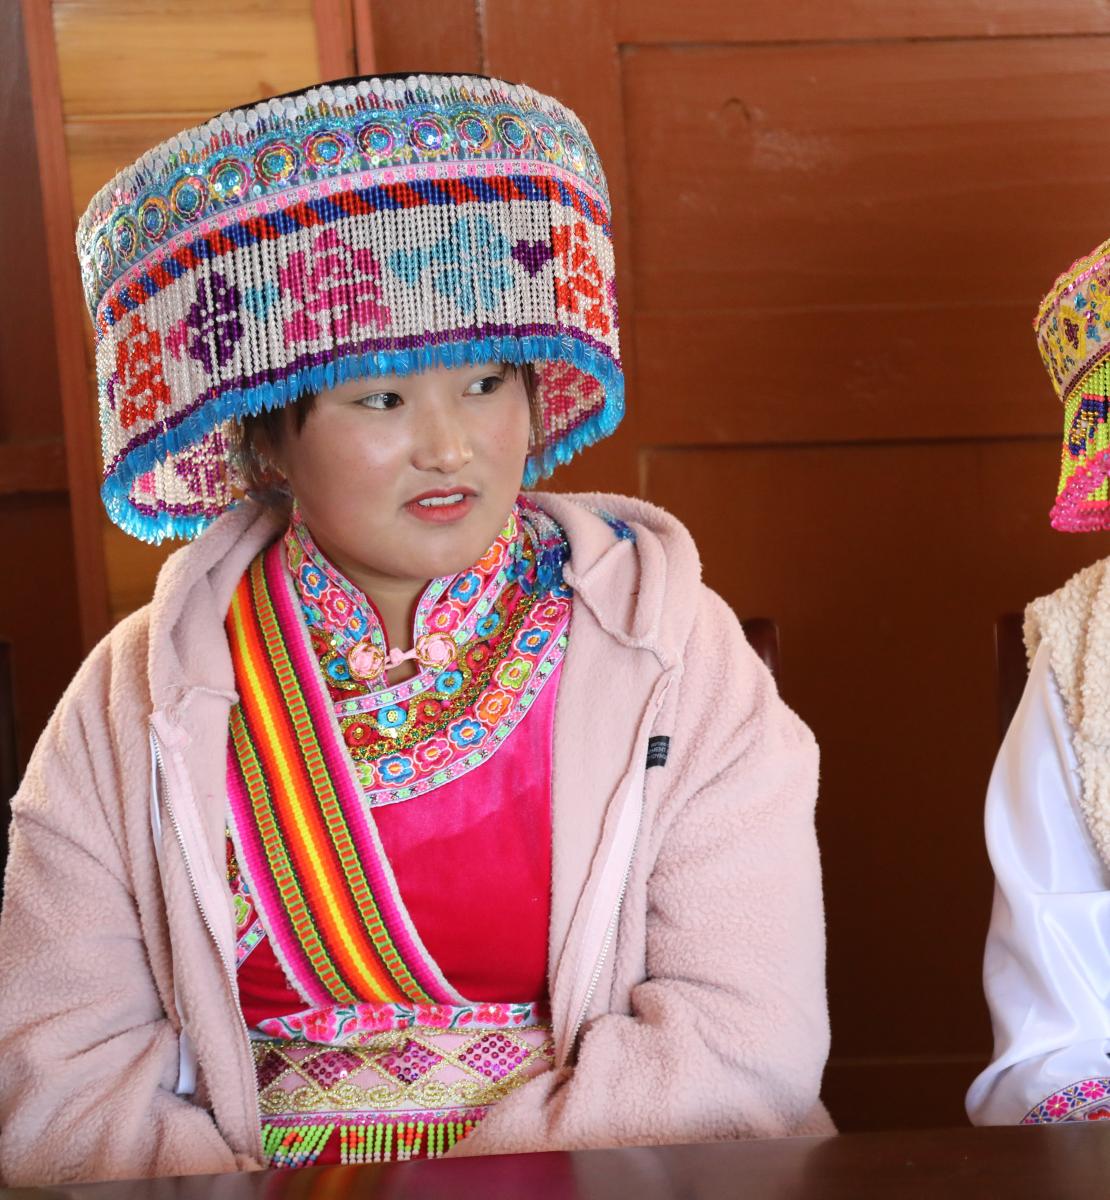 2 women from ethnic minority groups in China wearing colourful headwear and clothing